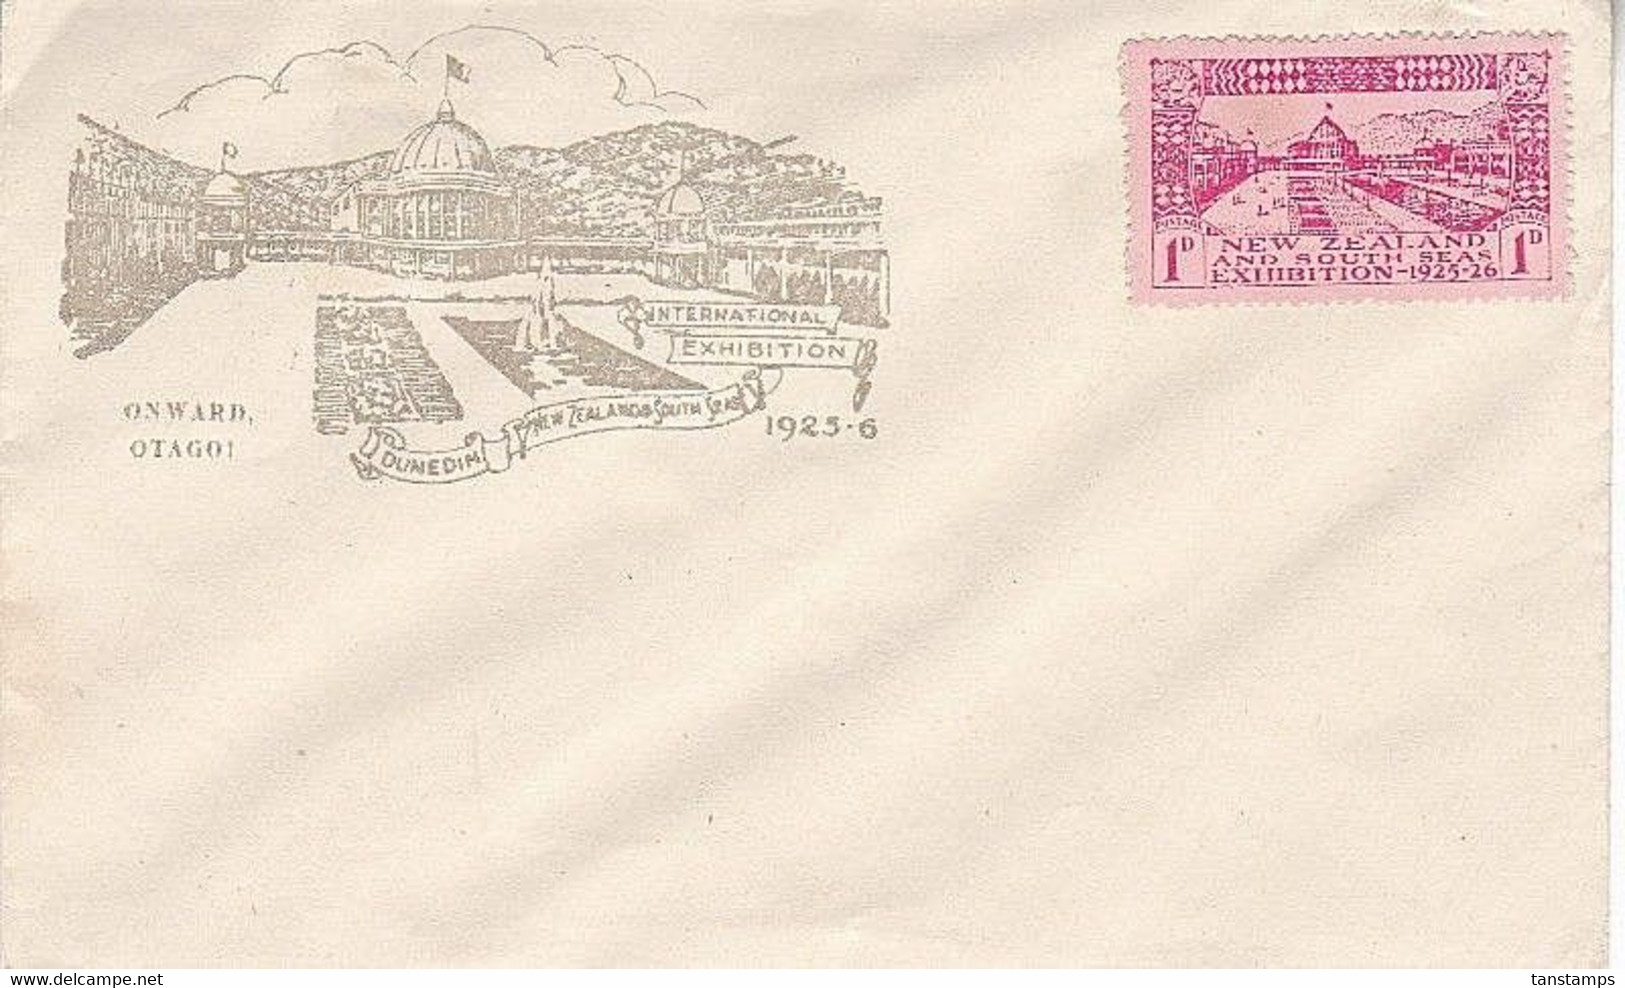 1925 DUNEDIN EXHIBITION STAMPED 1d PREPAID PRINTED STATIONERY COVER. - Covers & Documents